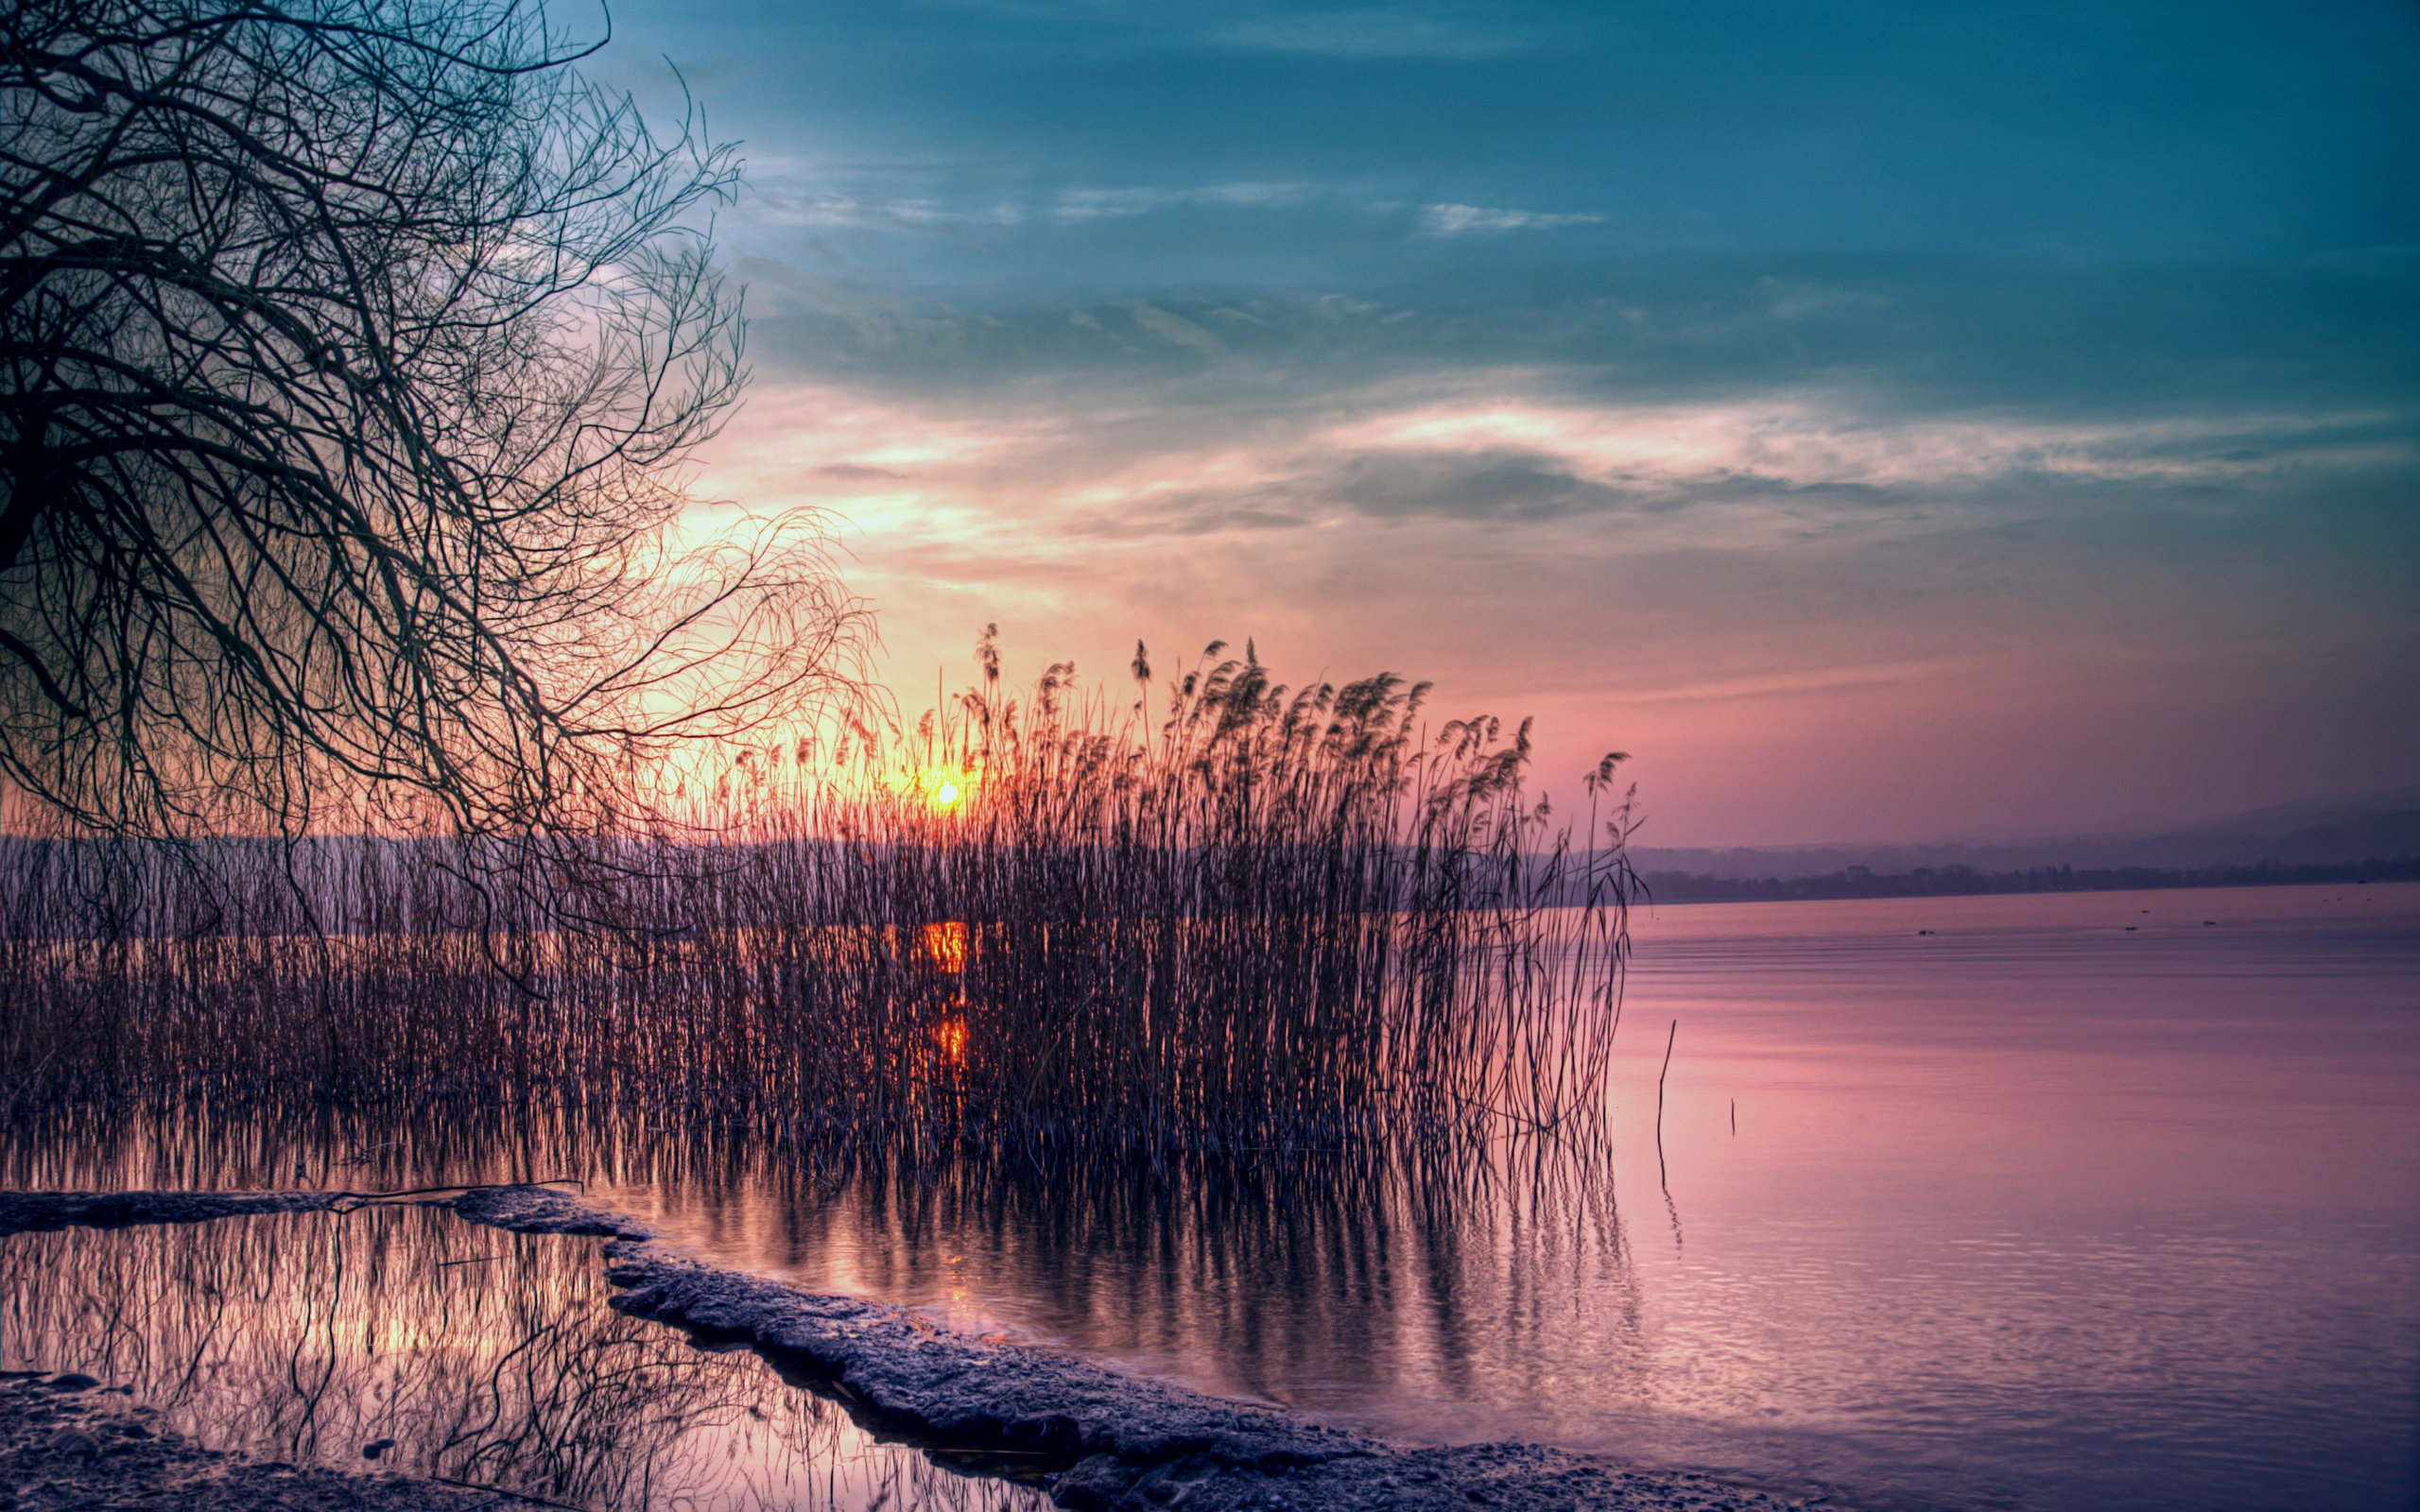 2560x1600 Wallpaper : reed, reservoir, decline, coast, evening, Willow, tree, branches wallhaven 1050997 HD Wallpapers